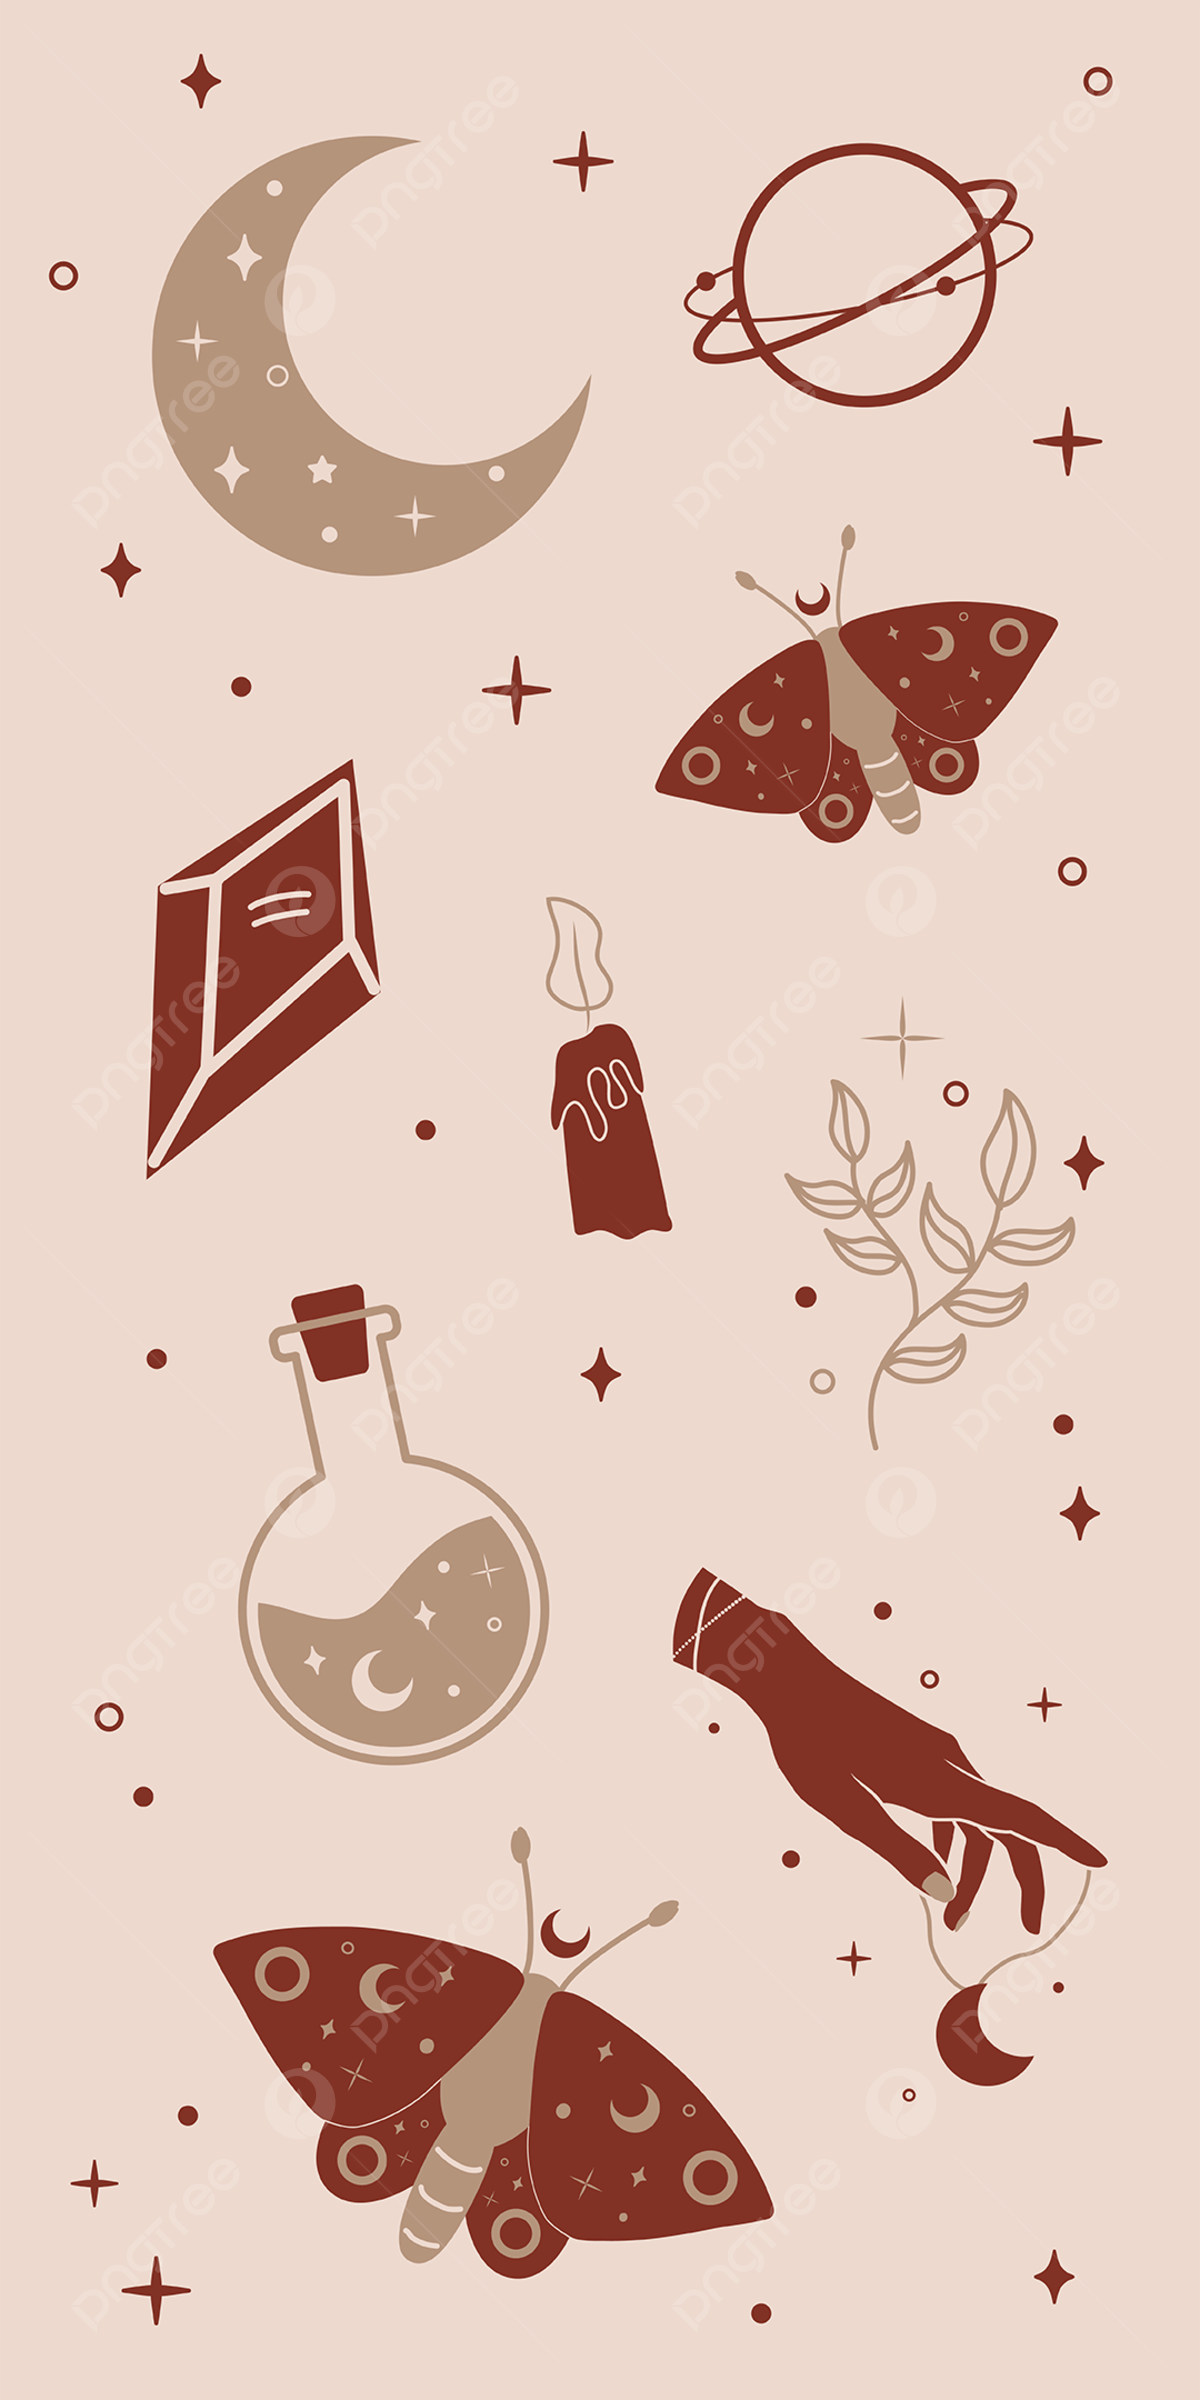 A set of symbols and objects - Witch